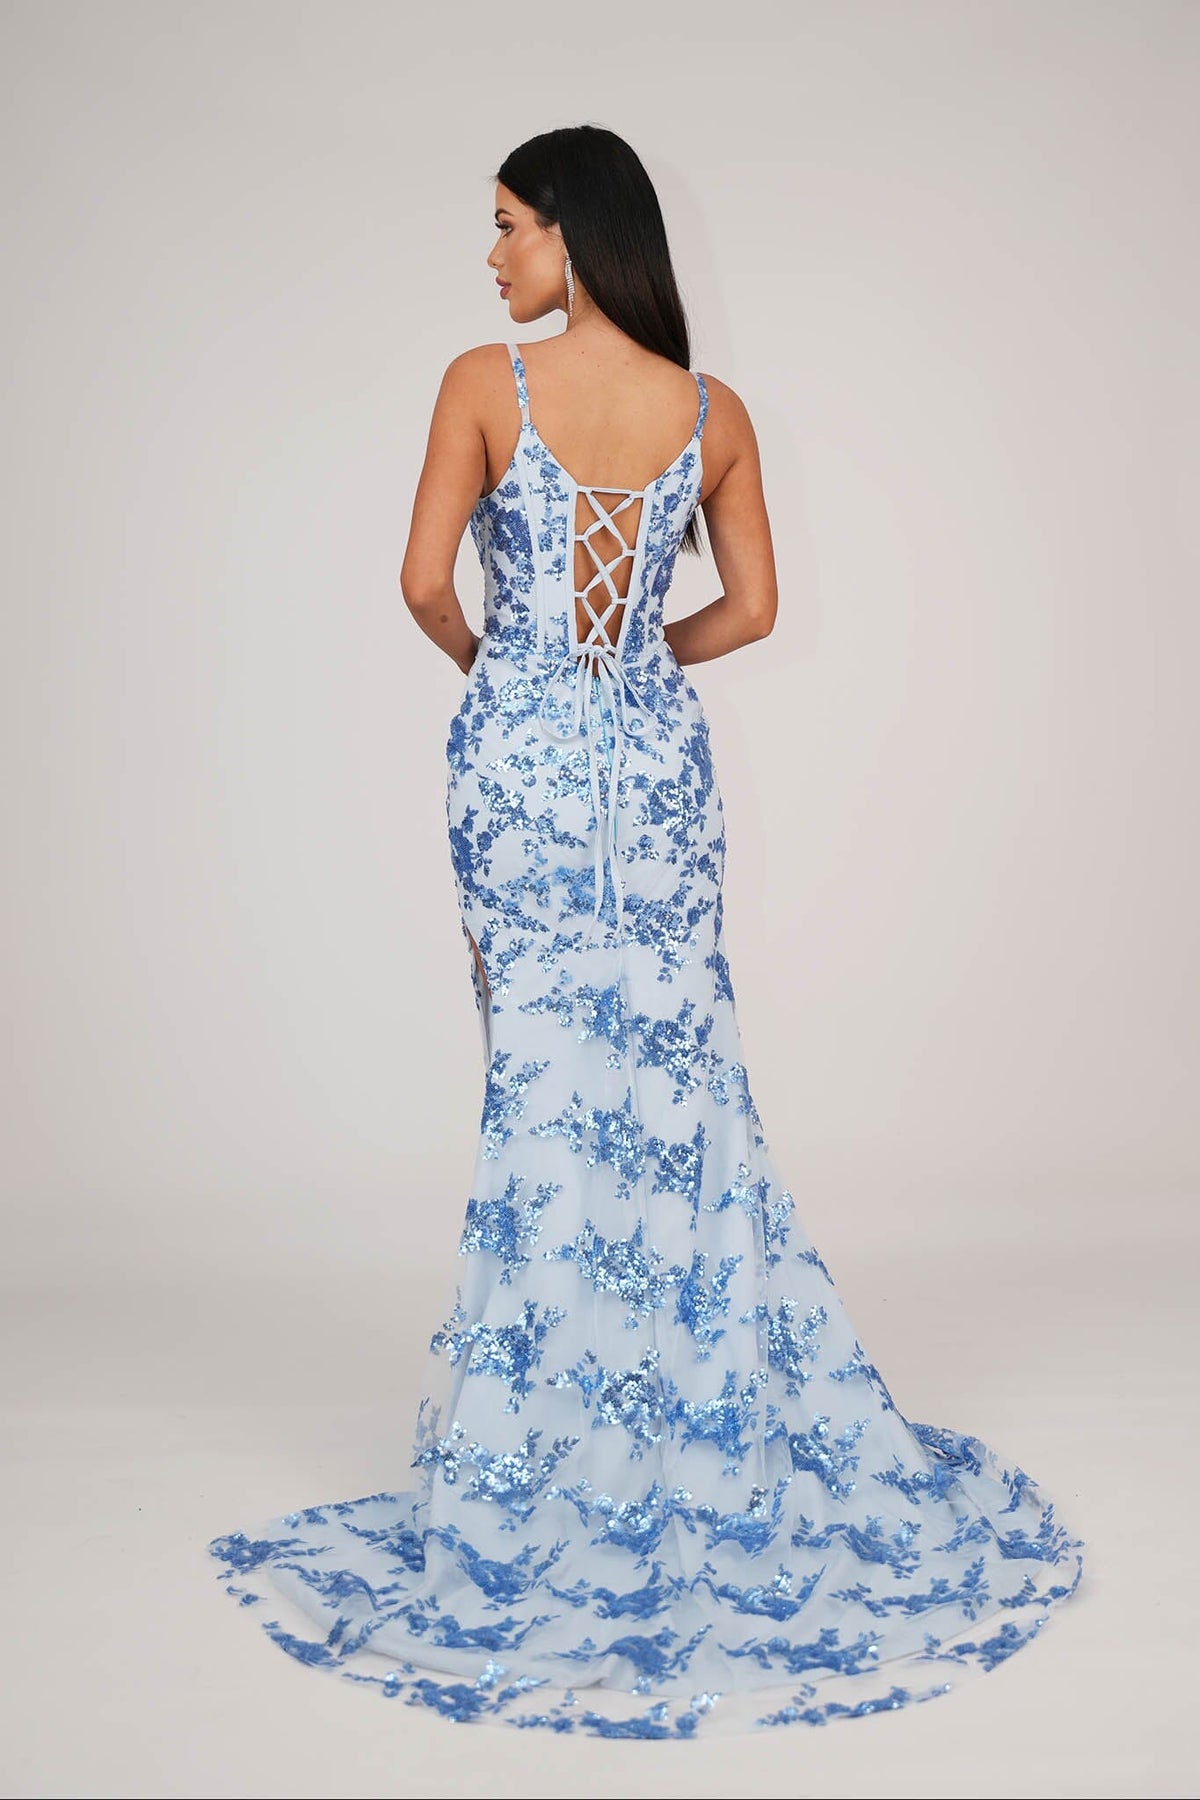 Lace Up Open Back and Sweep Train of Light Blue Floral Embellished Sequins Floor Length Evening Gown with Corset Bodice, Mesh Insert and Side Slit 